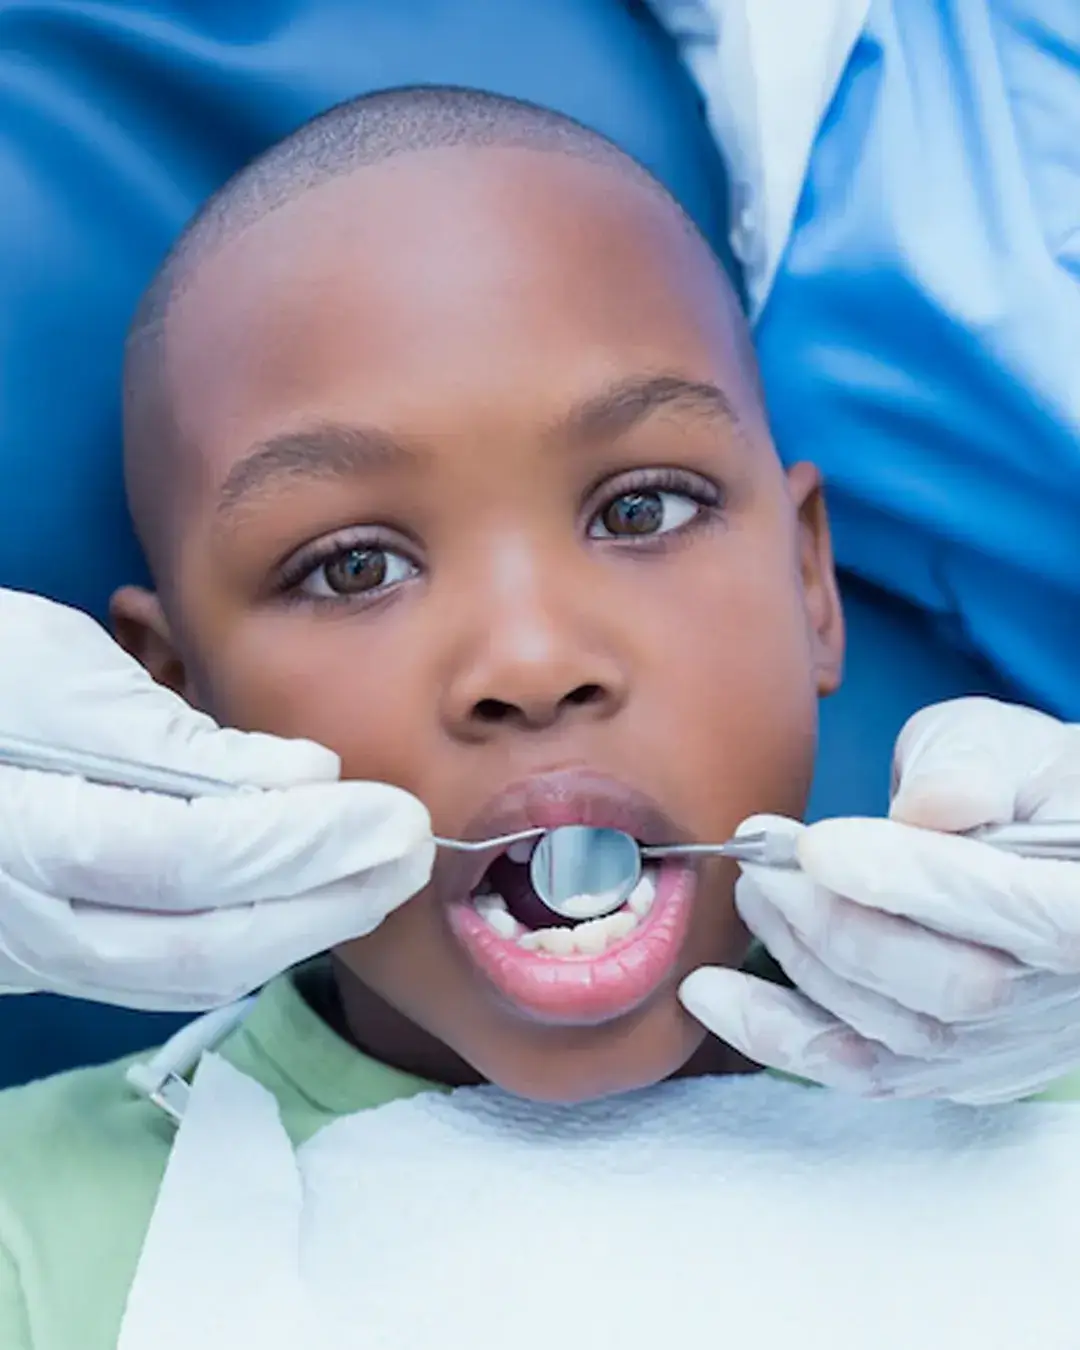 Pulpectomy: Root canal treatment for the baby's teeth in Kampala